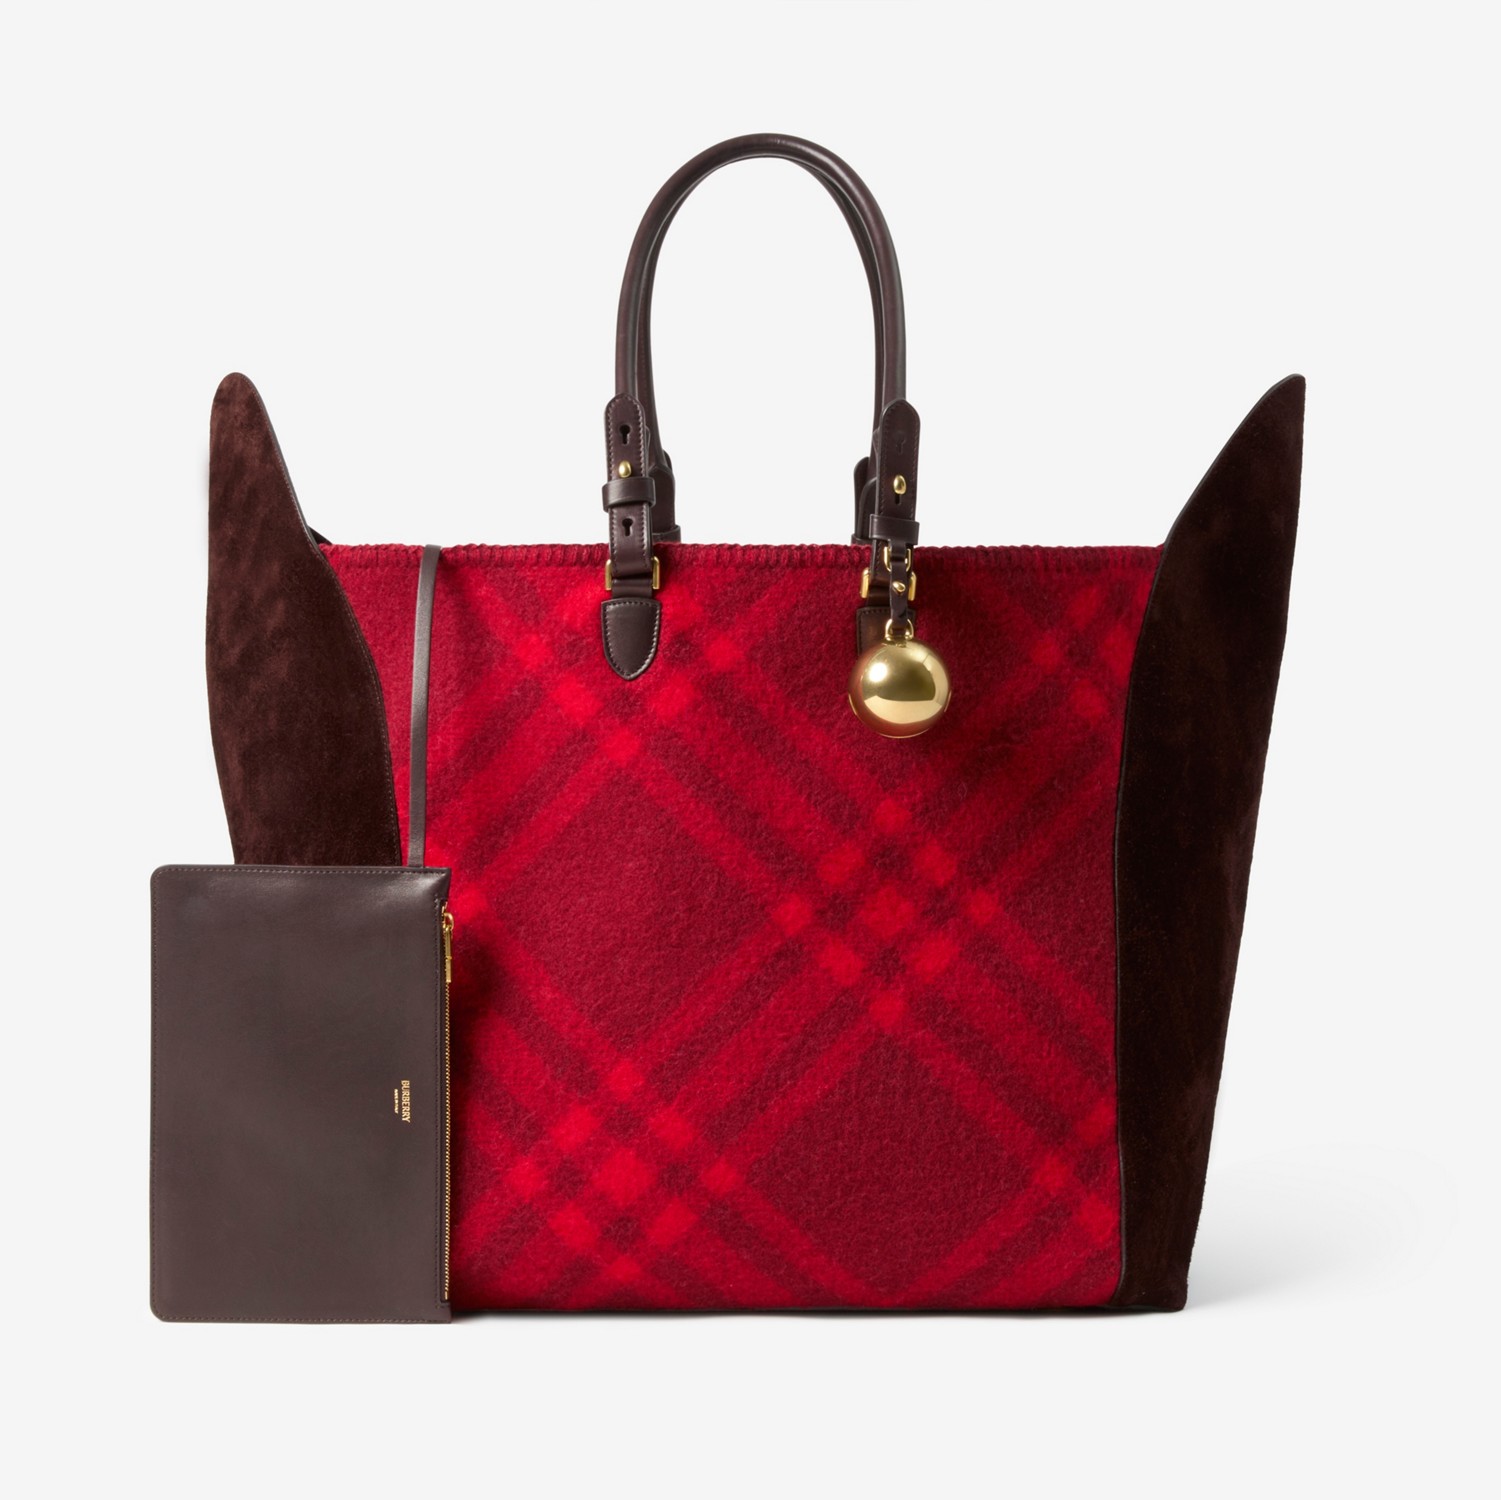 Tote Shield extra large (Ripple) - Donna | Sito ufficiale Burberry®